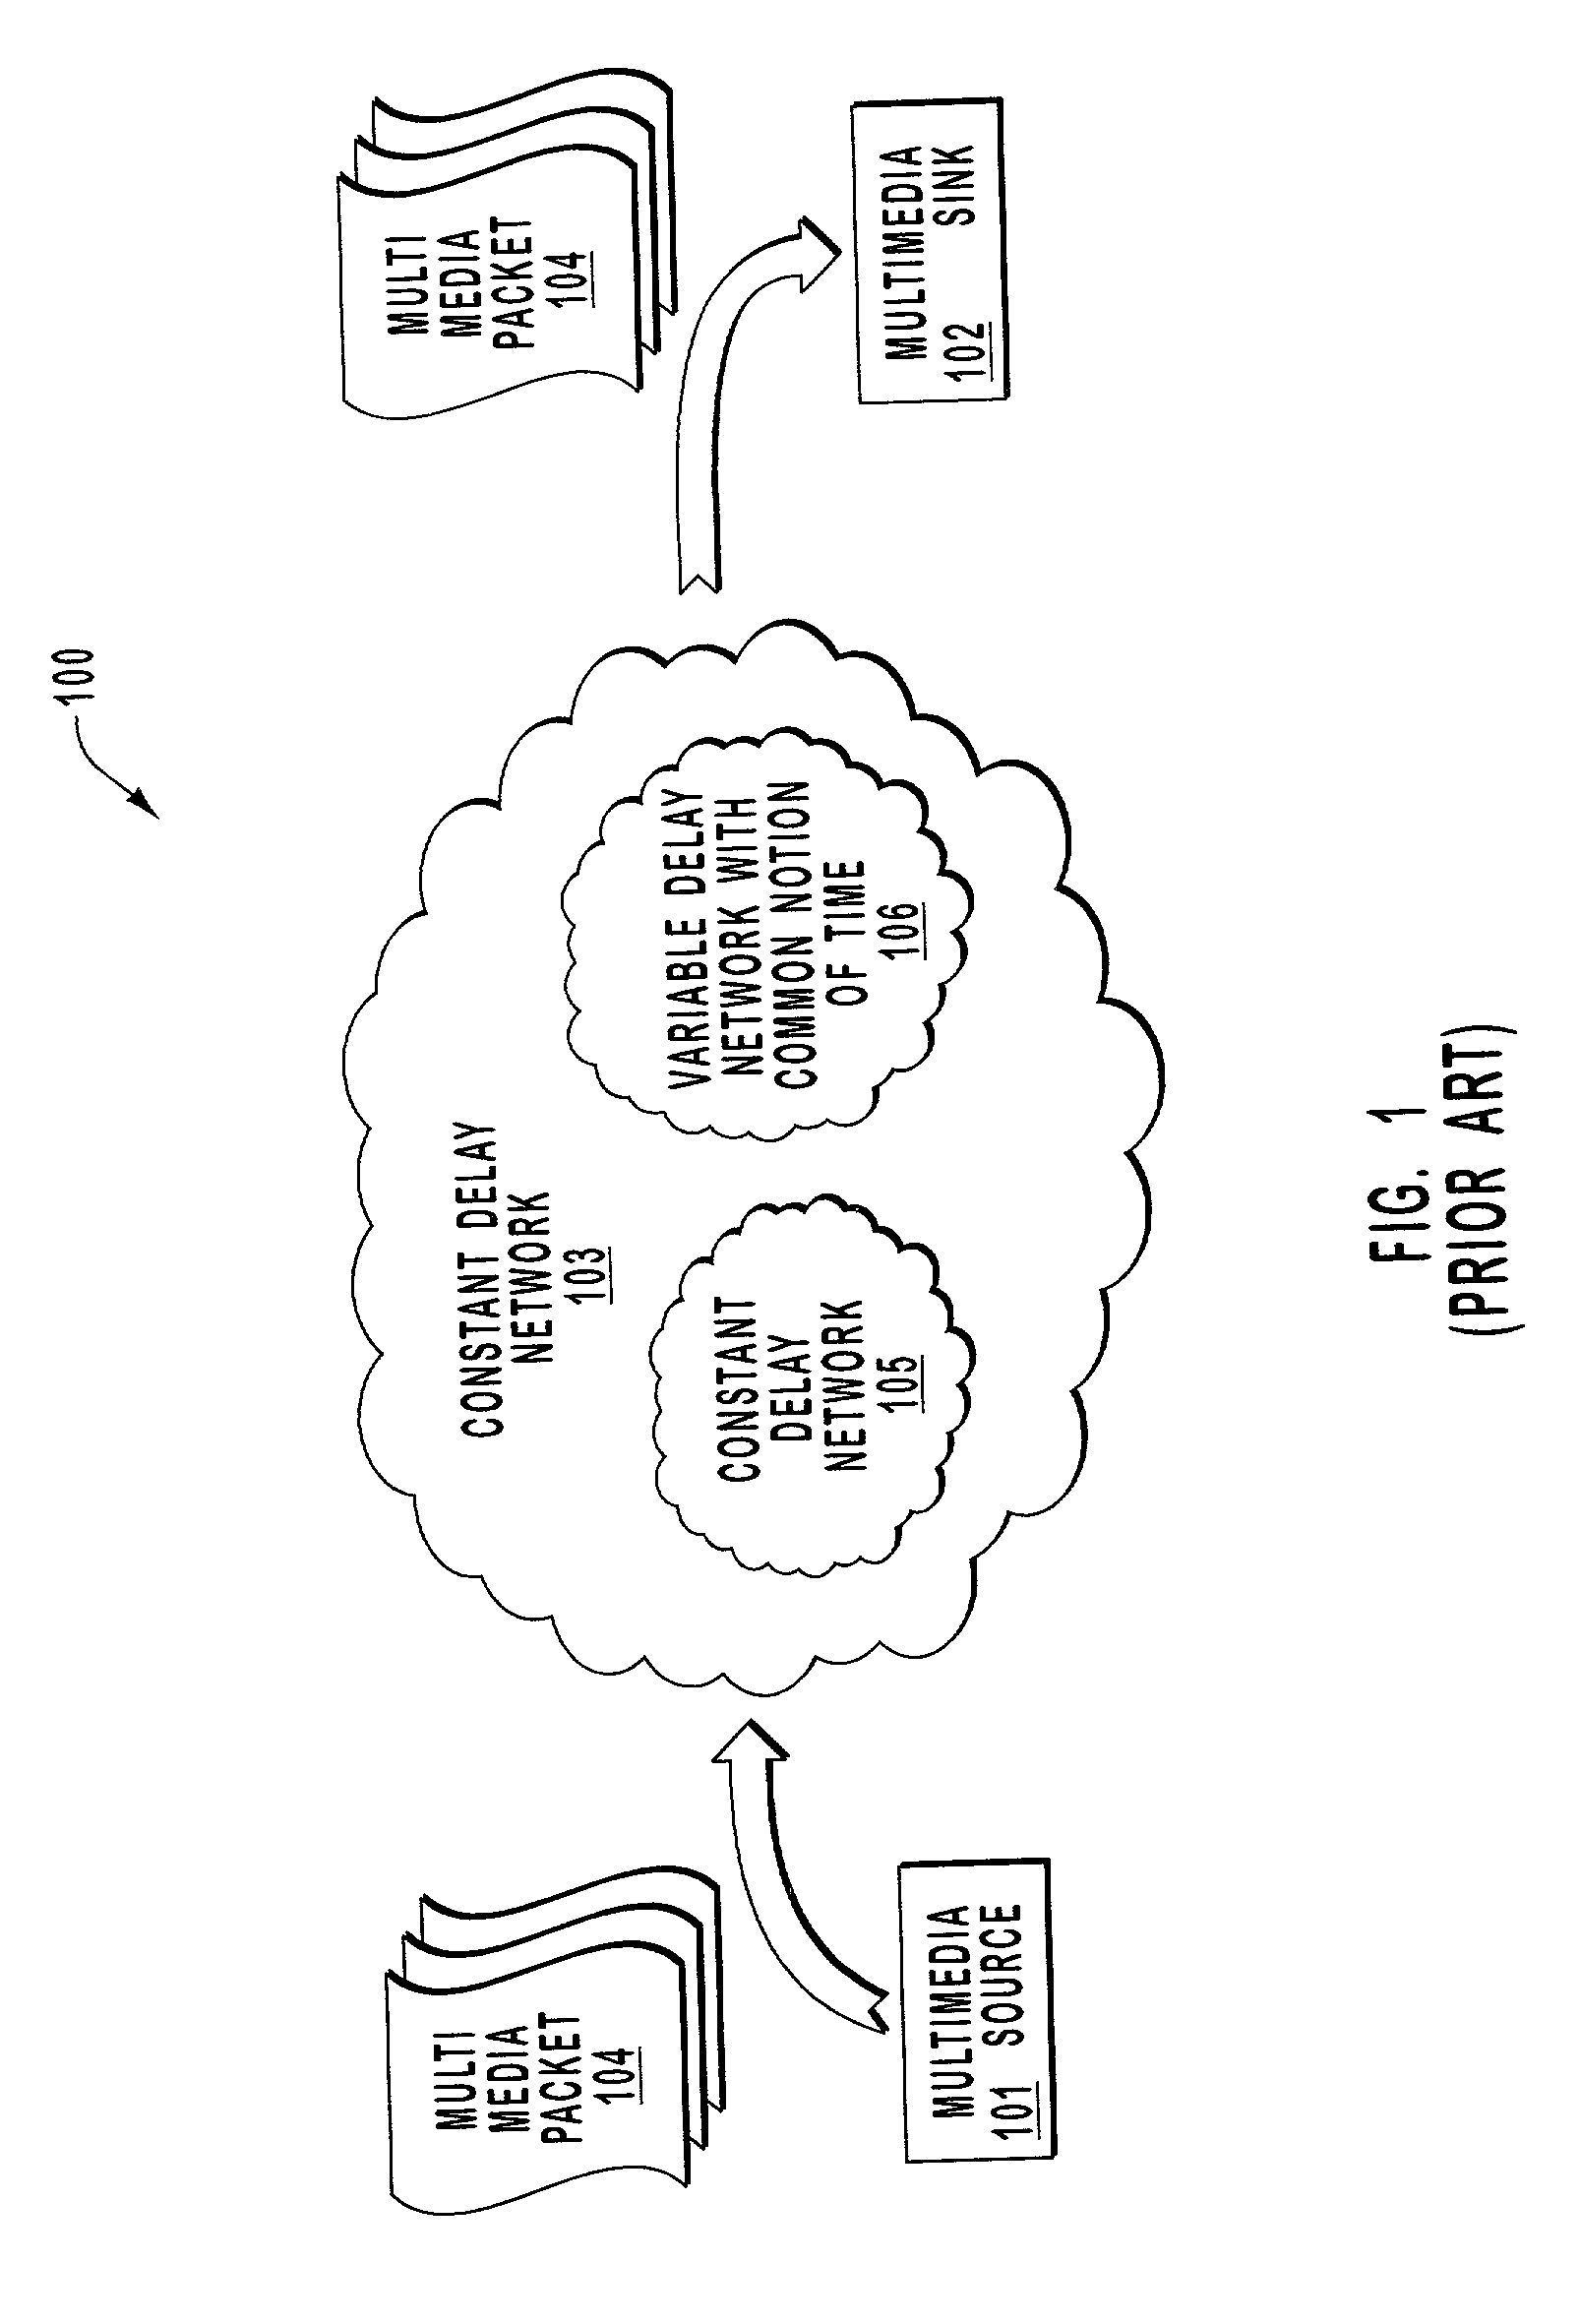 Methods and systems for distributing multimedia data over heterogeneous networks